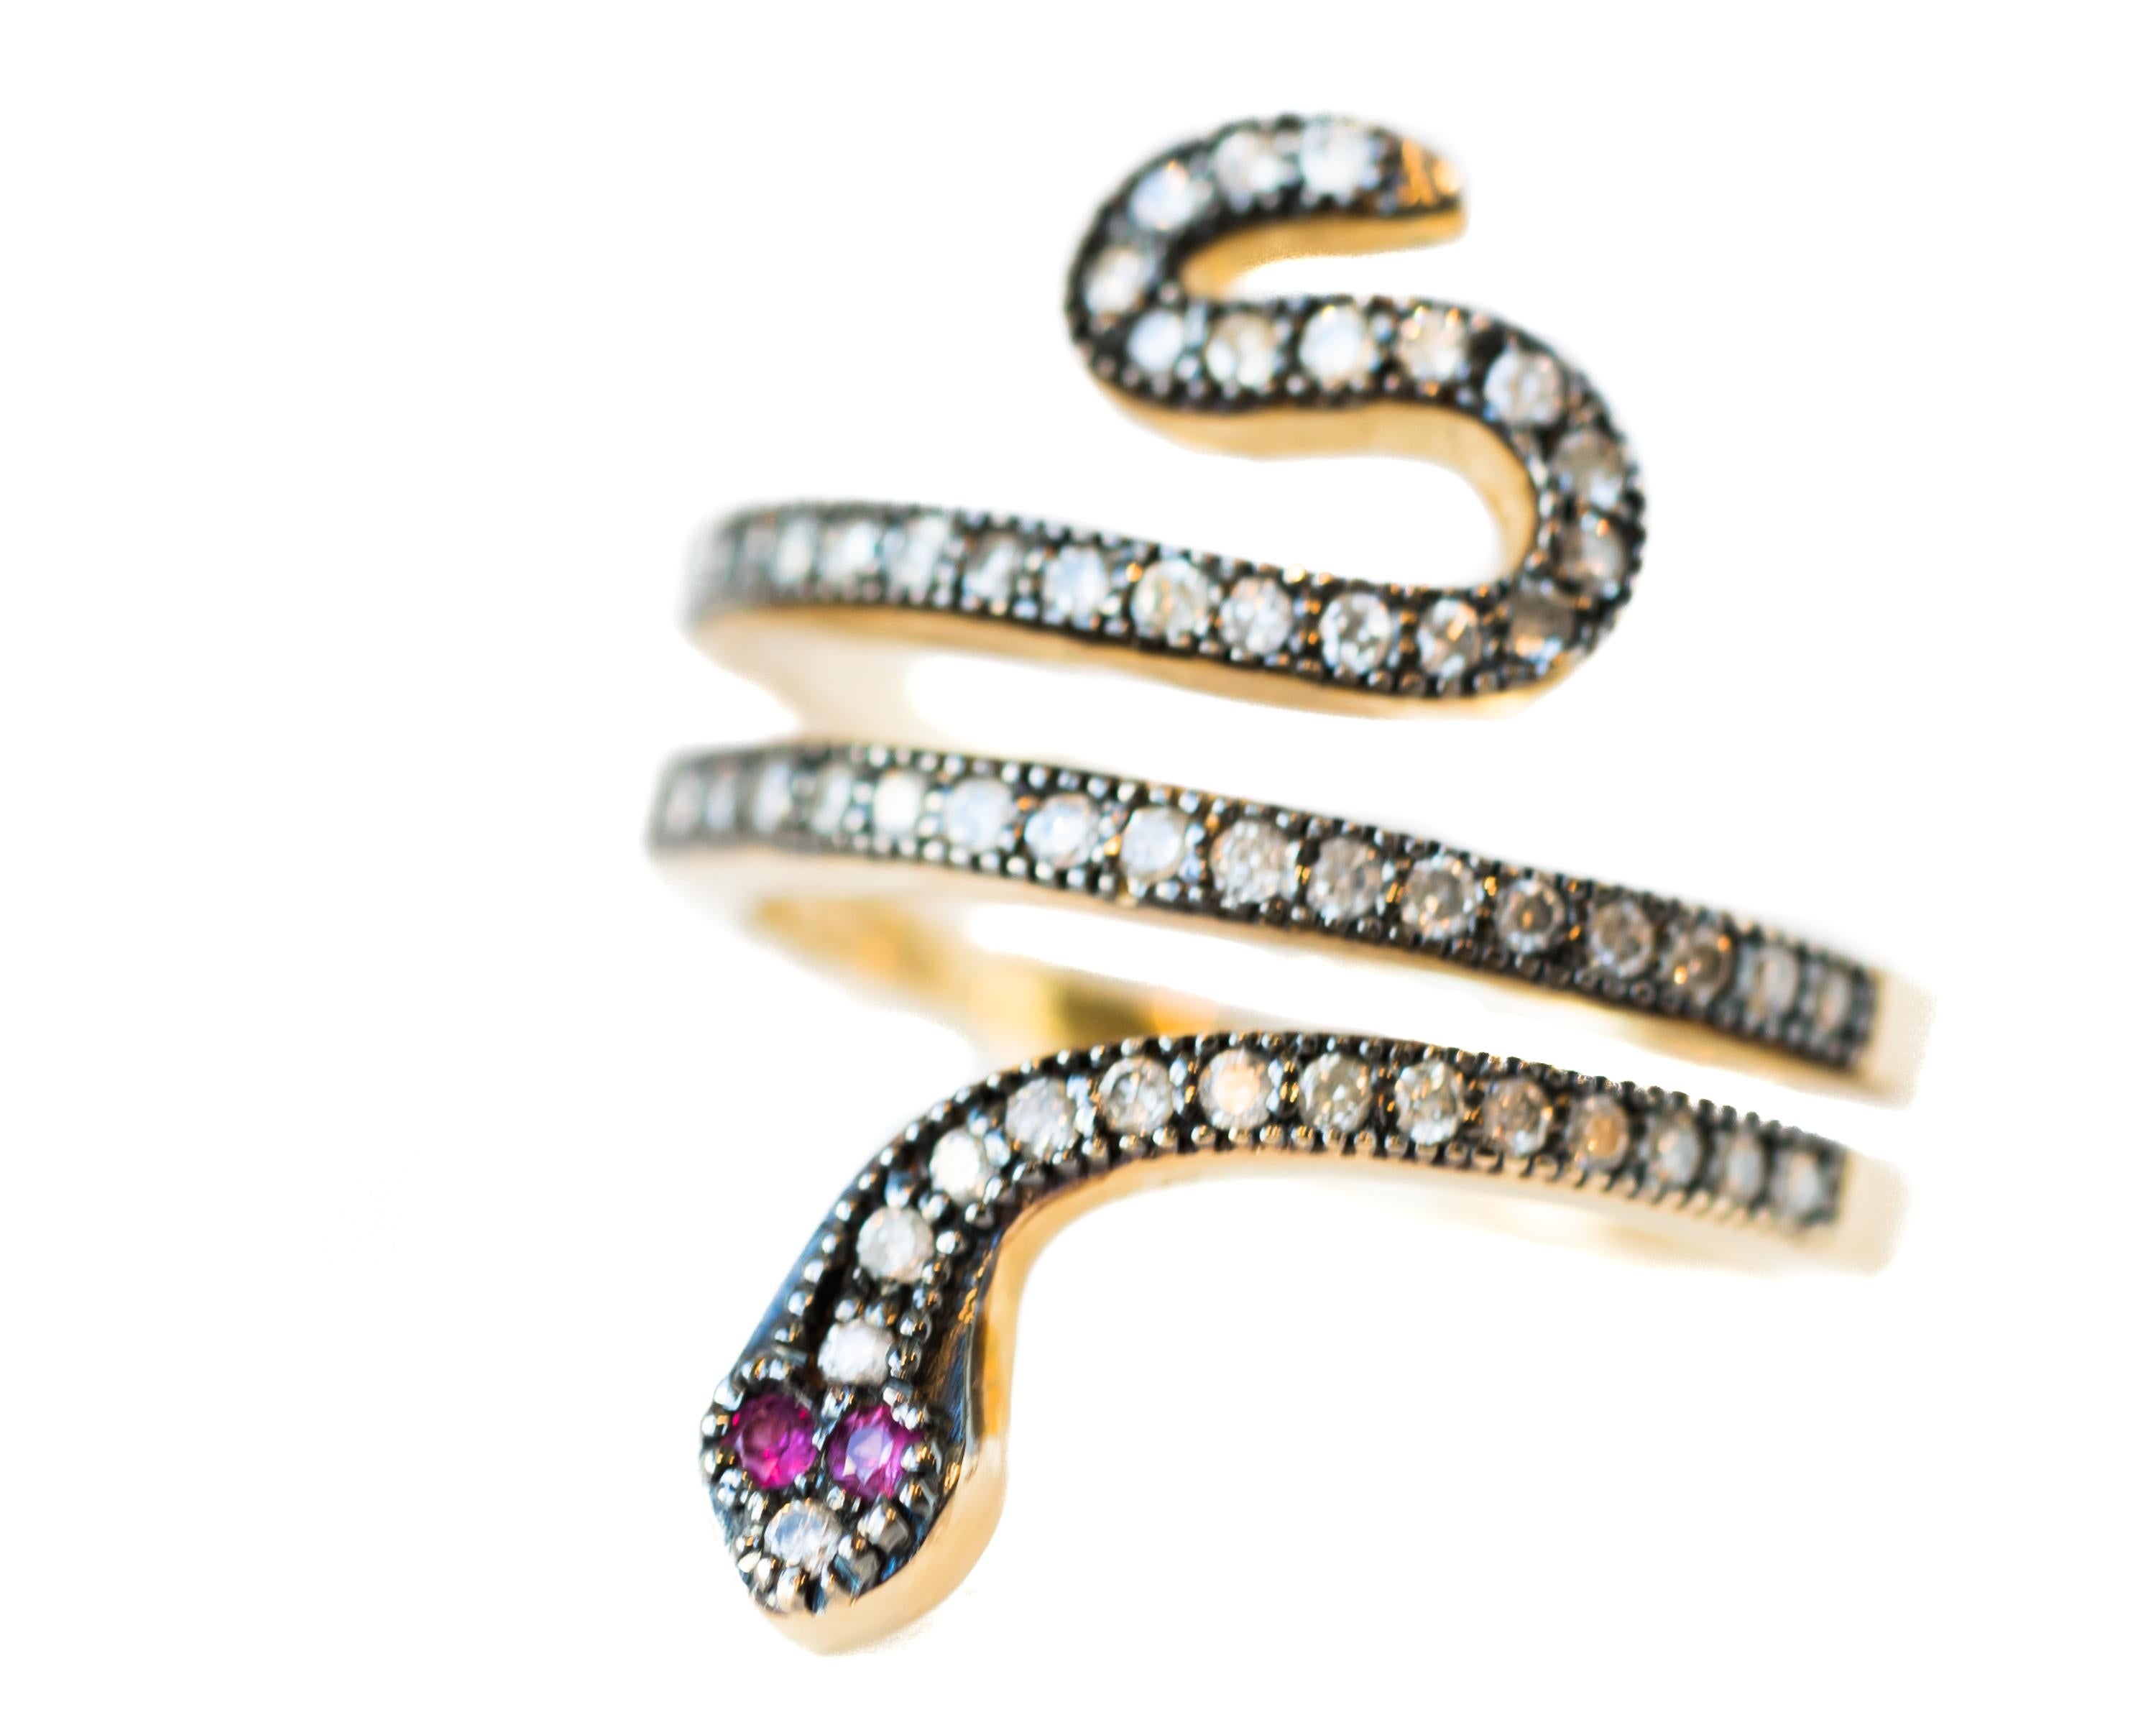 Snake Ring crafted in 14 karat Yellow Gold wth Diamonds and Rubies

Features:
0.39 carat total Diamonds, Coils on front of the ring are diamond encrusted
0.09 carat total Rubies make up the eyes, quantity 2
Crafted in 14 karat Yellow Gold